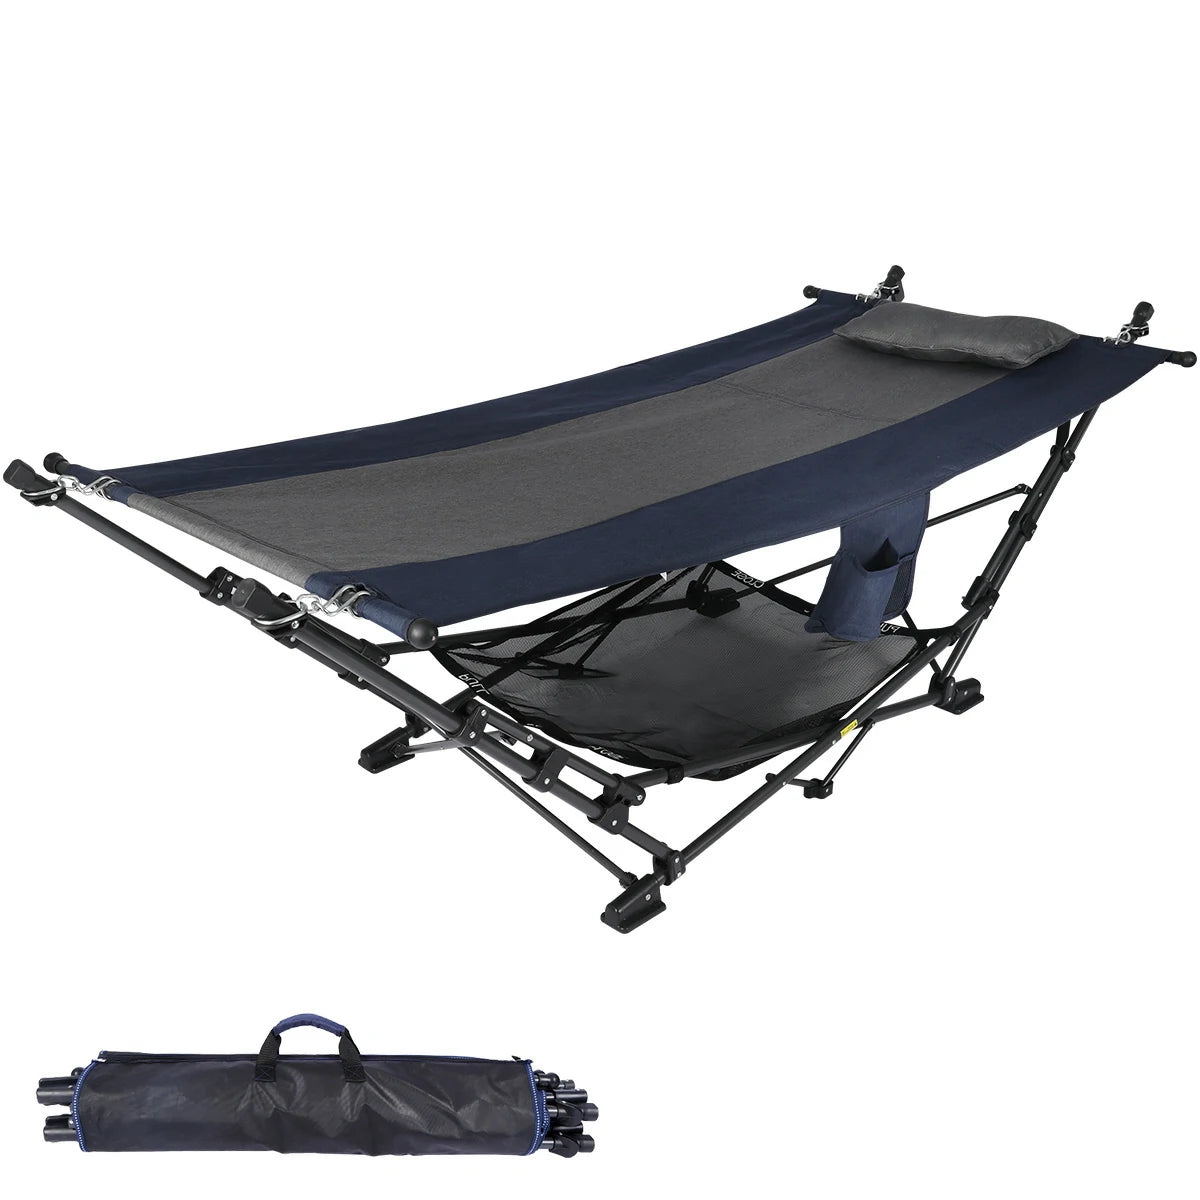 Portable Hammock with Stand and Carrying Bag